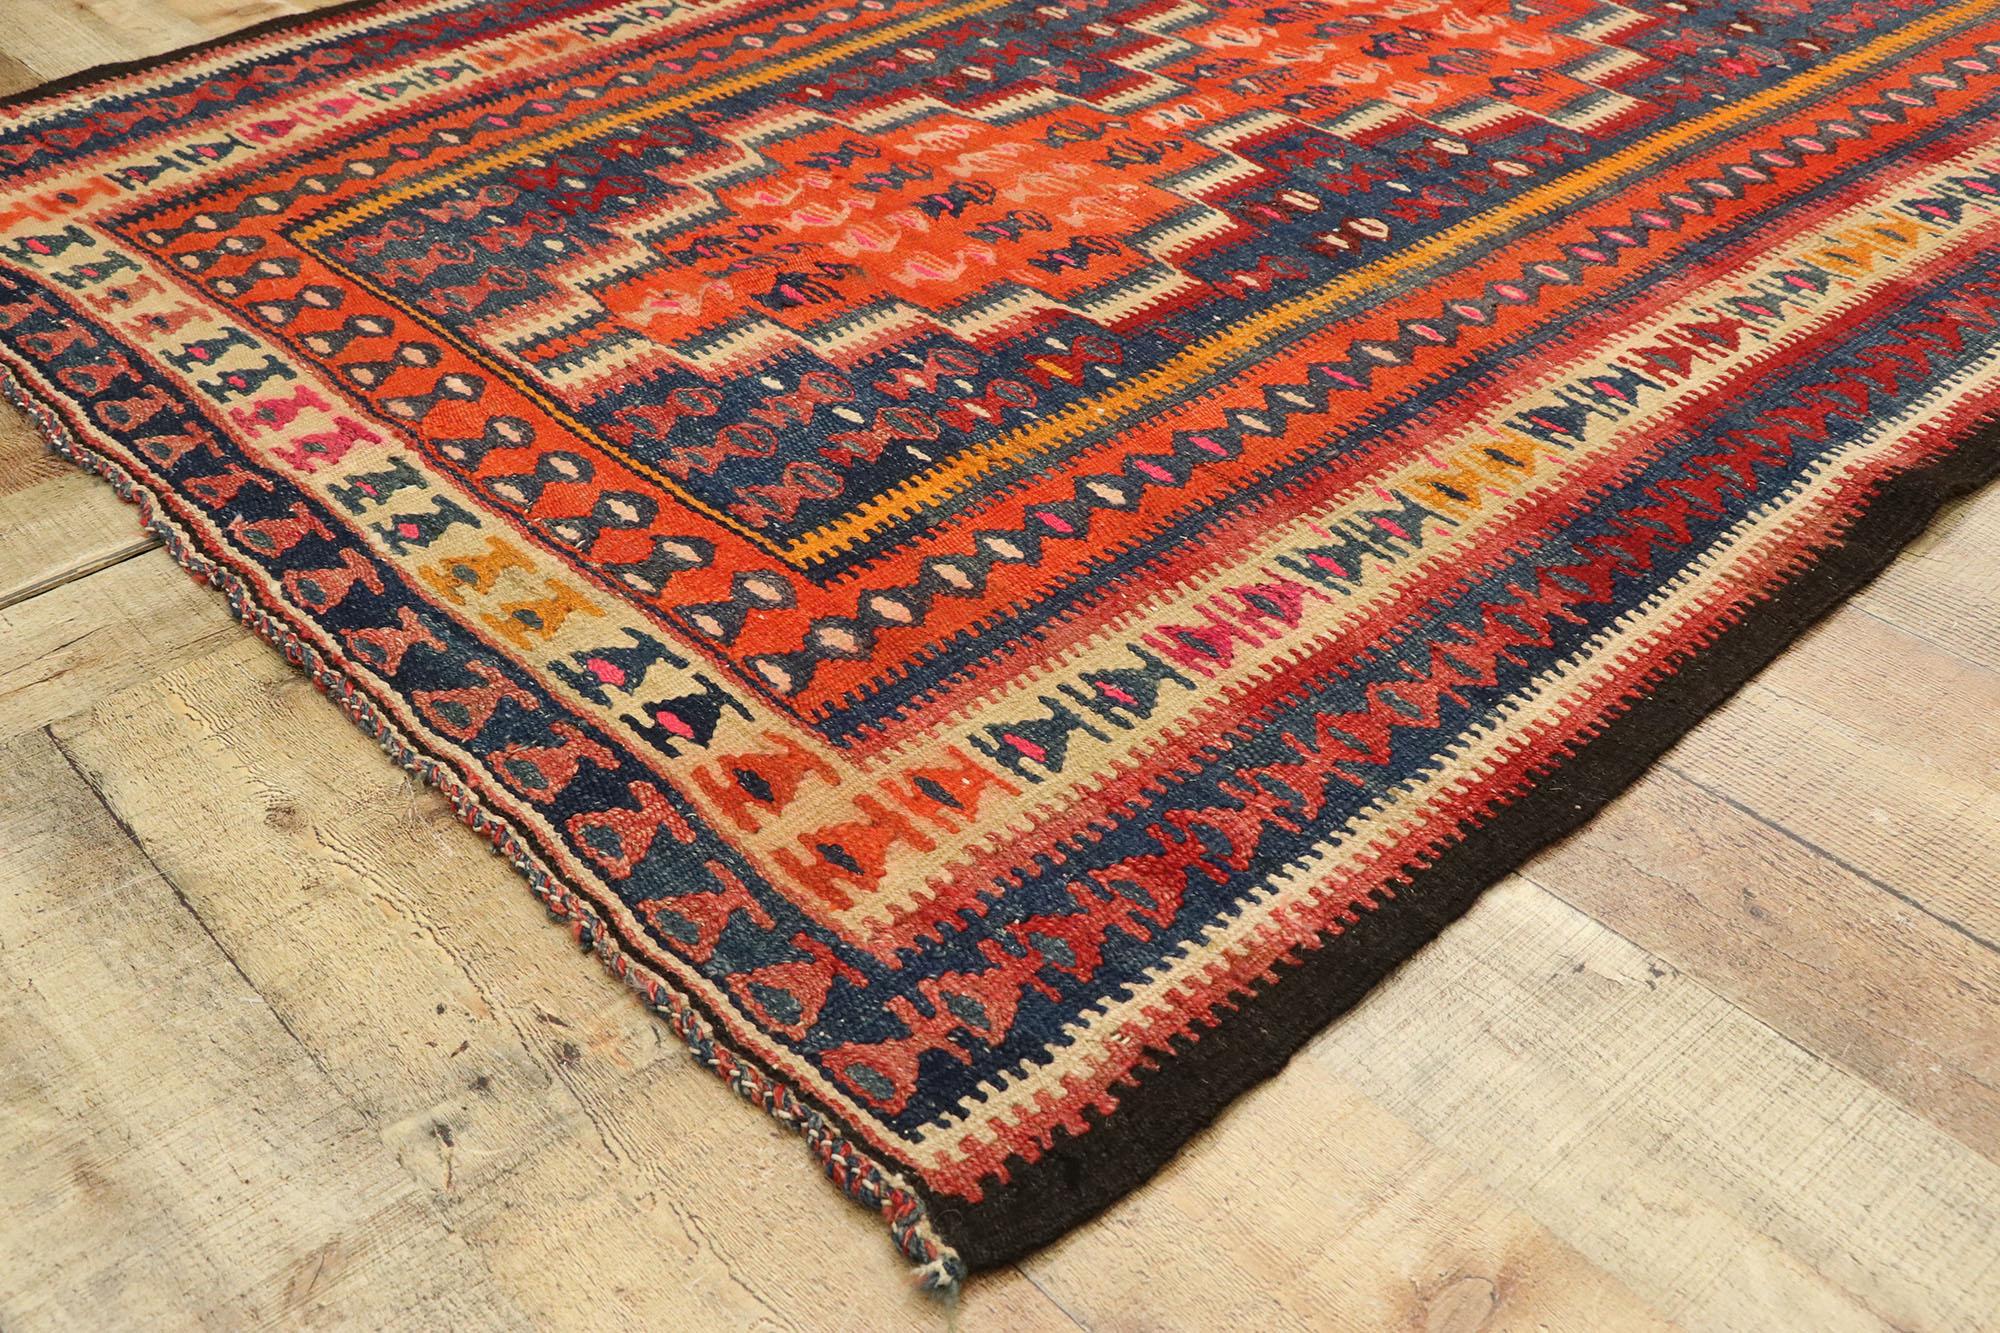  Vintage Turkish Tribal Flatweave Carpet In Good Condition For Sale In Dallas, TX